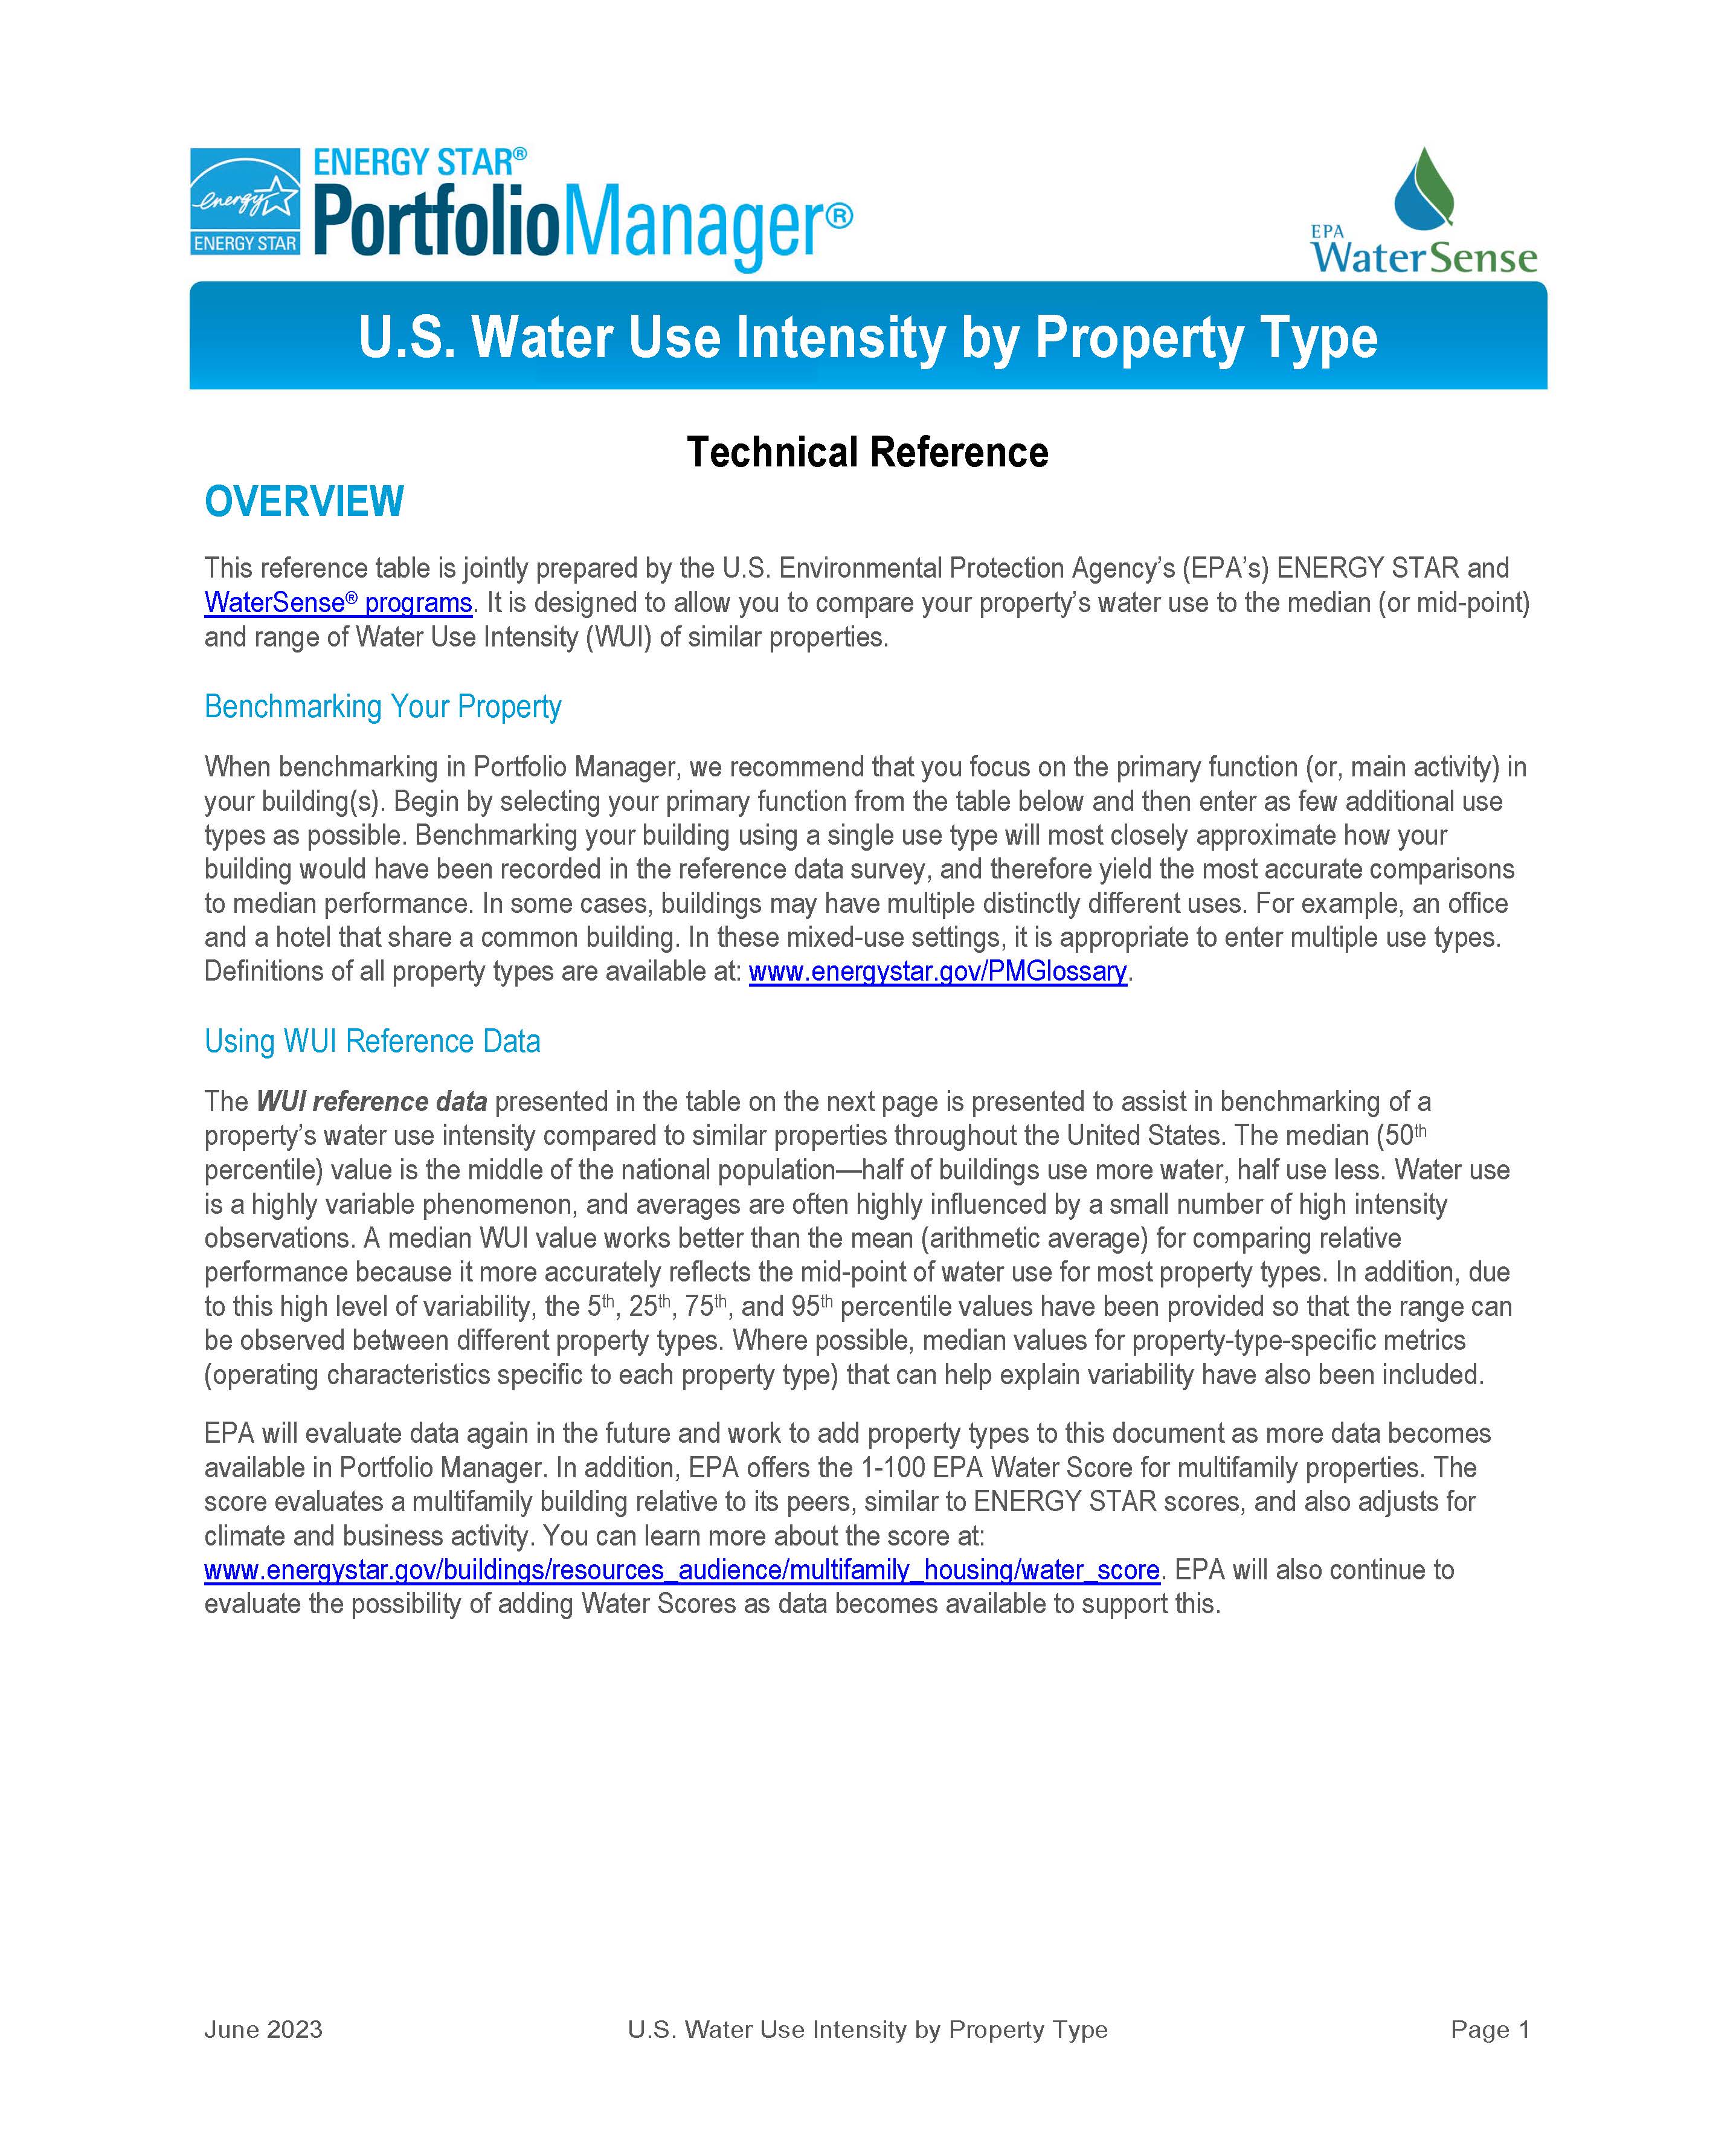 First page of U.S. Water Use Intensity by Property Type: Technical Reference.